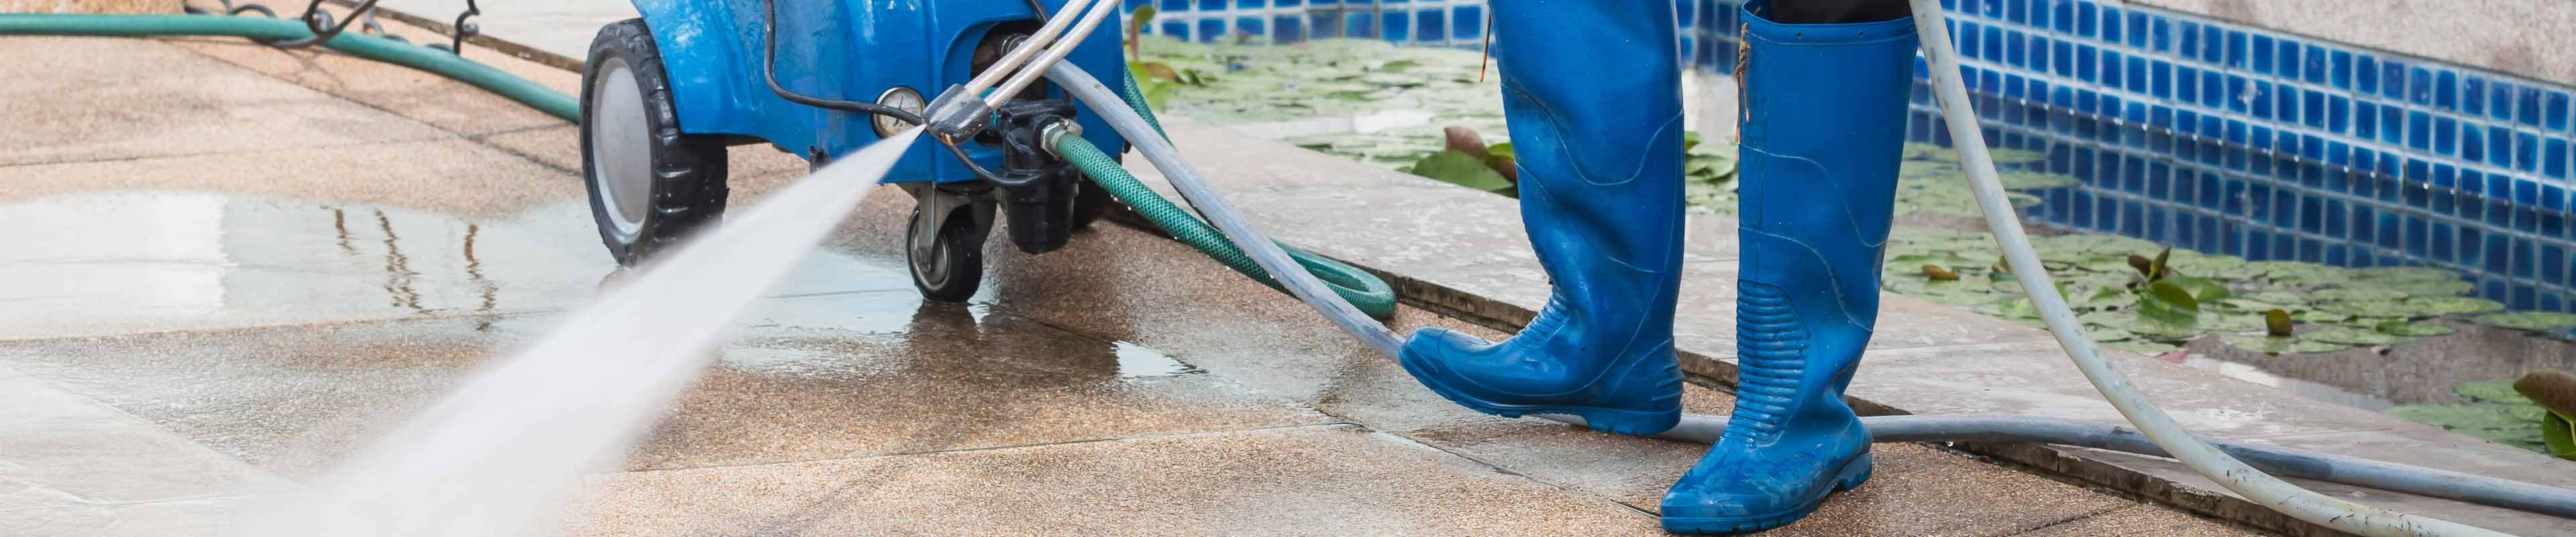 someone wearing rubber boots using a power washer on the ground